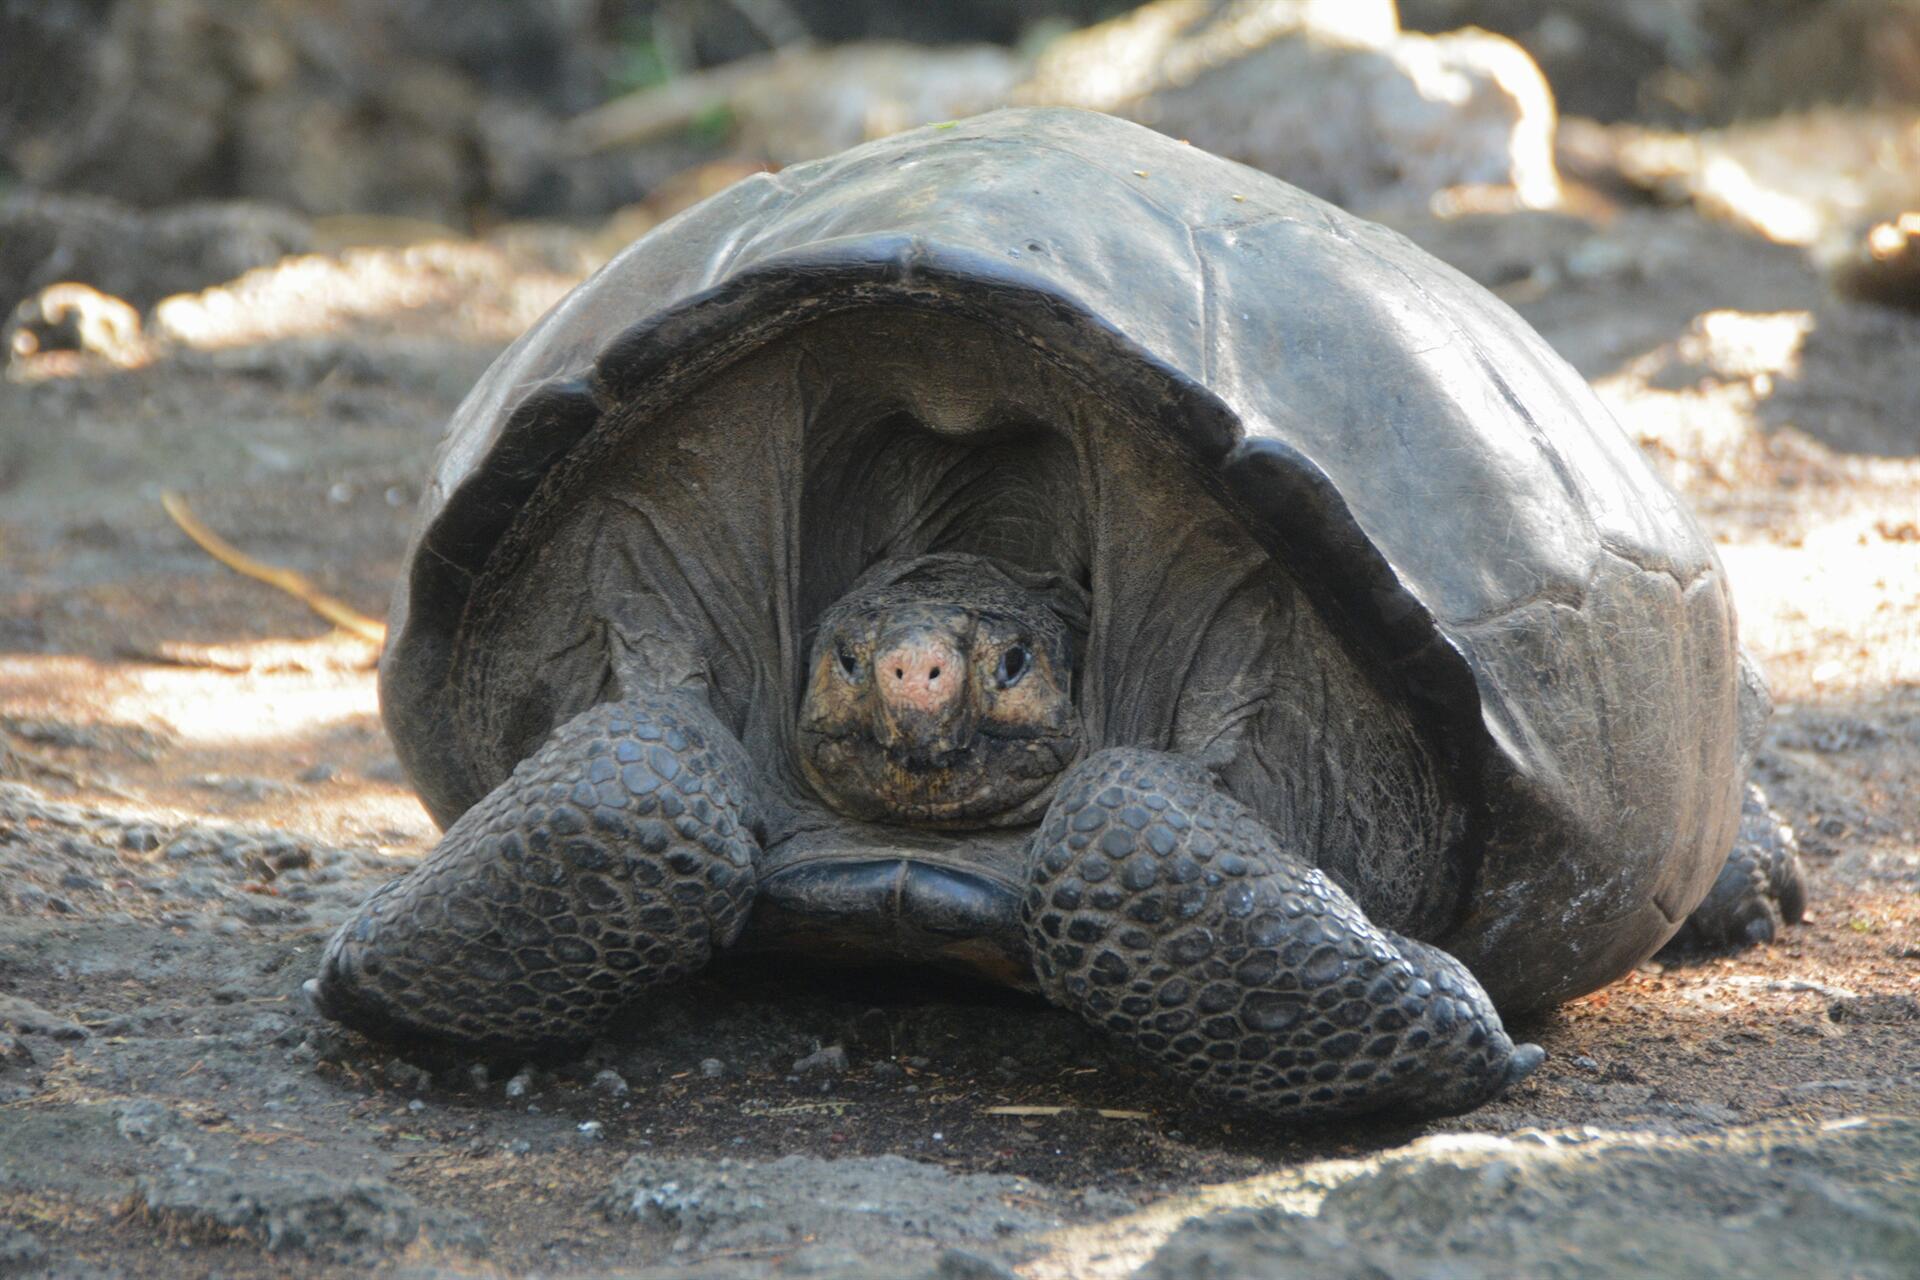 Giant tortoise thought extinct is found on Galapagos